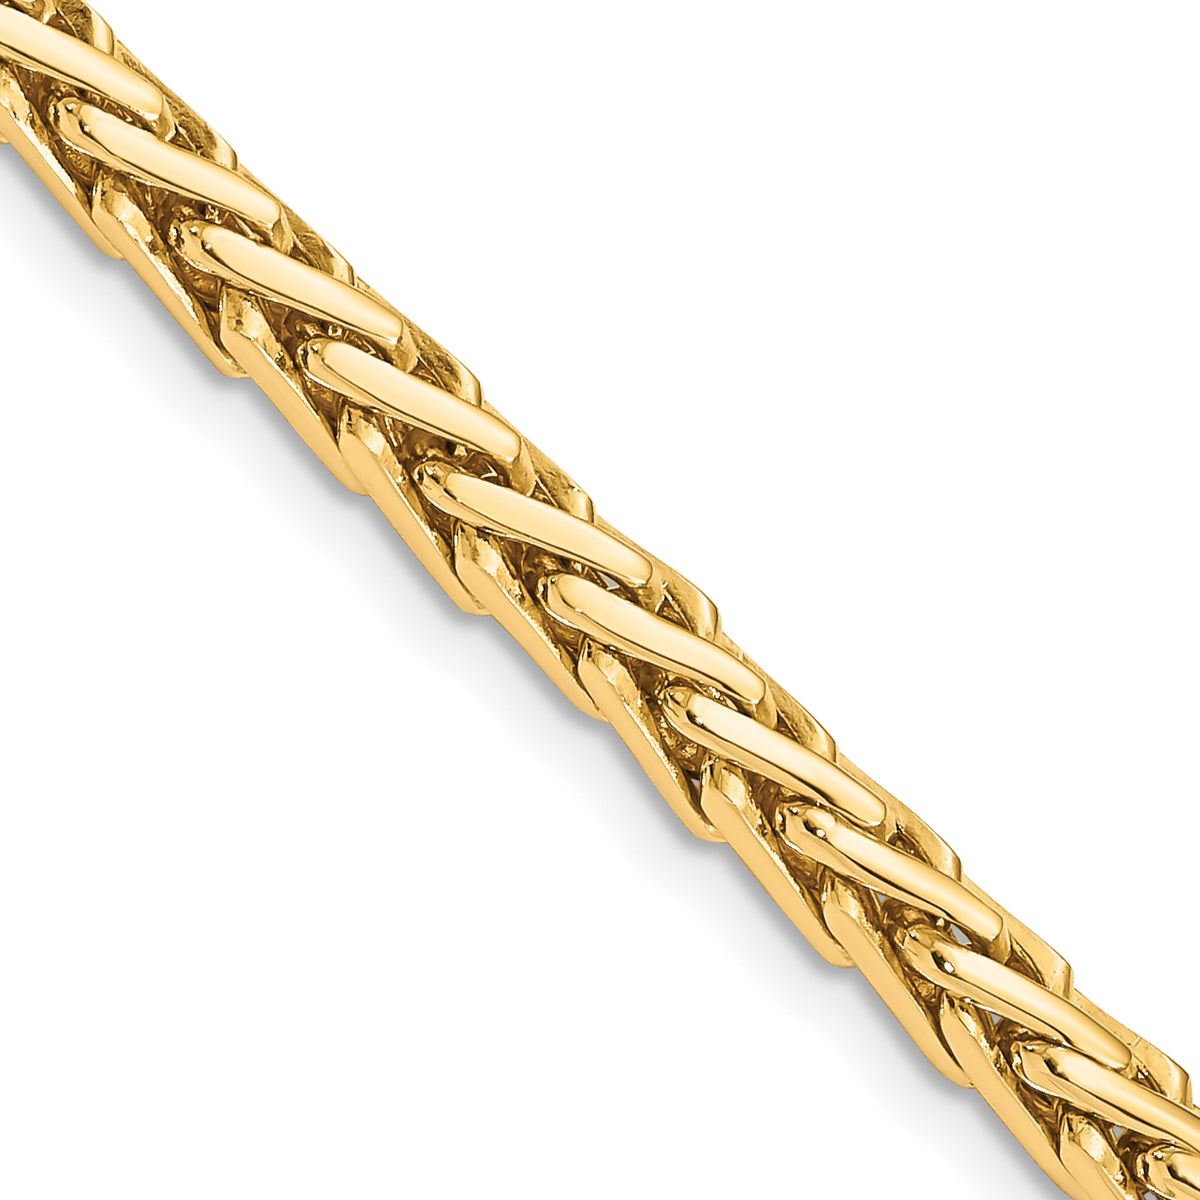 14K 24 inch 4.4mm Hand Polished Flat-Edged Woven Link with Lobster Clasp Chain